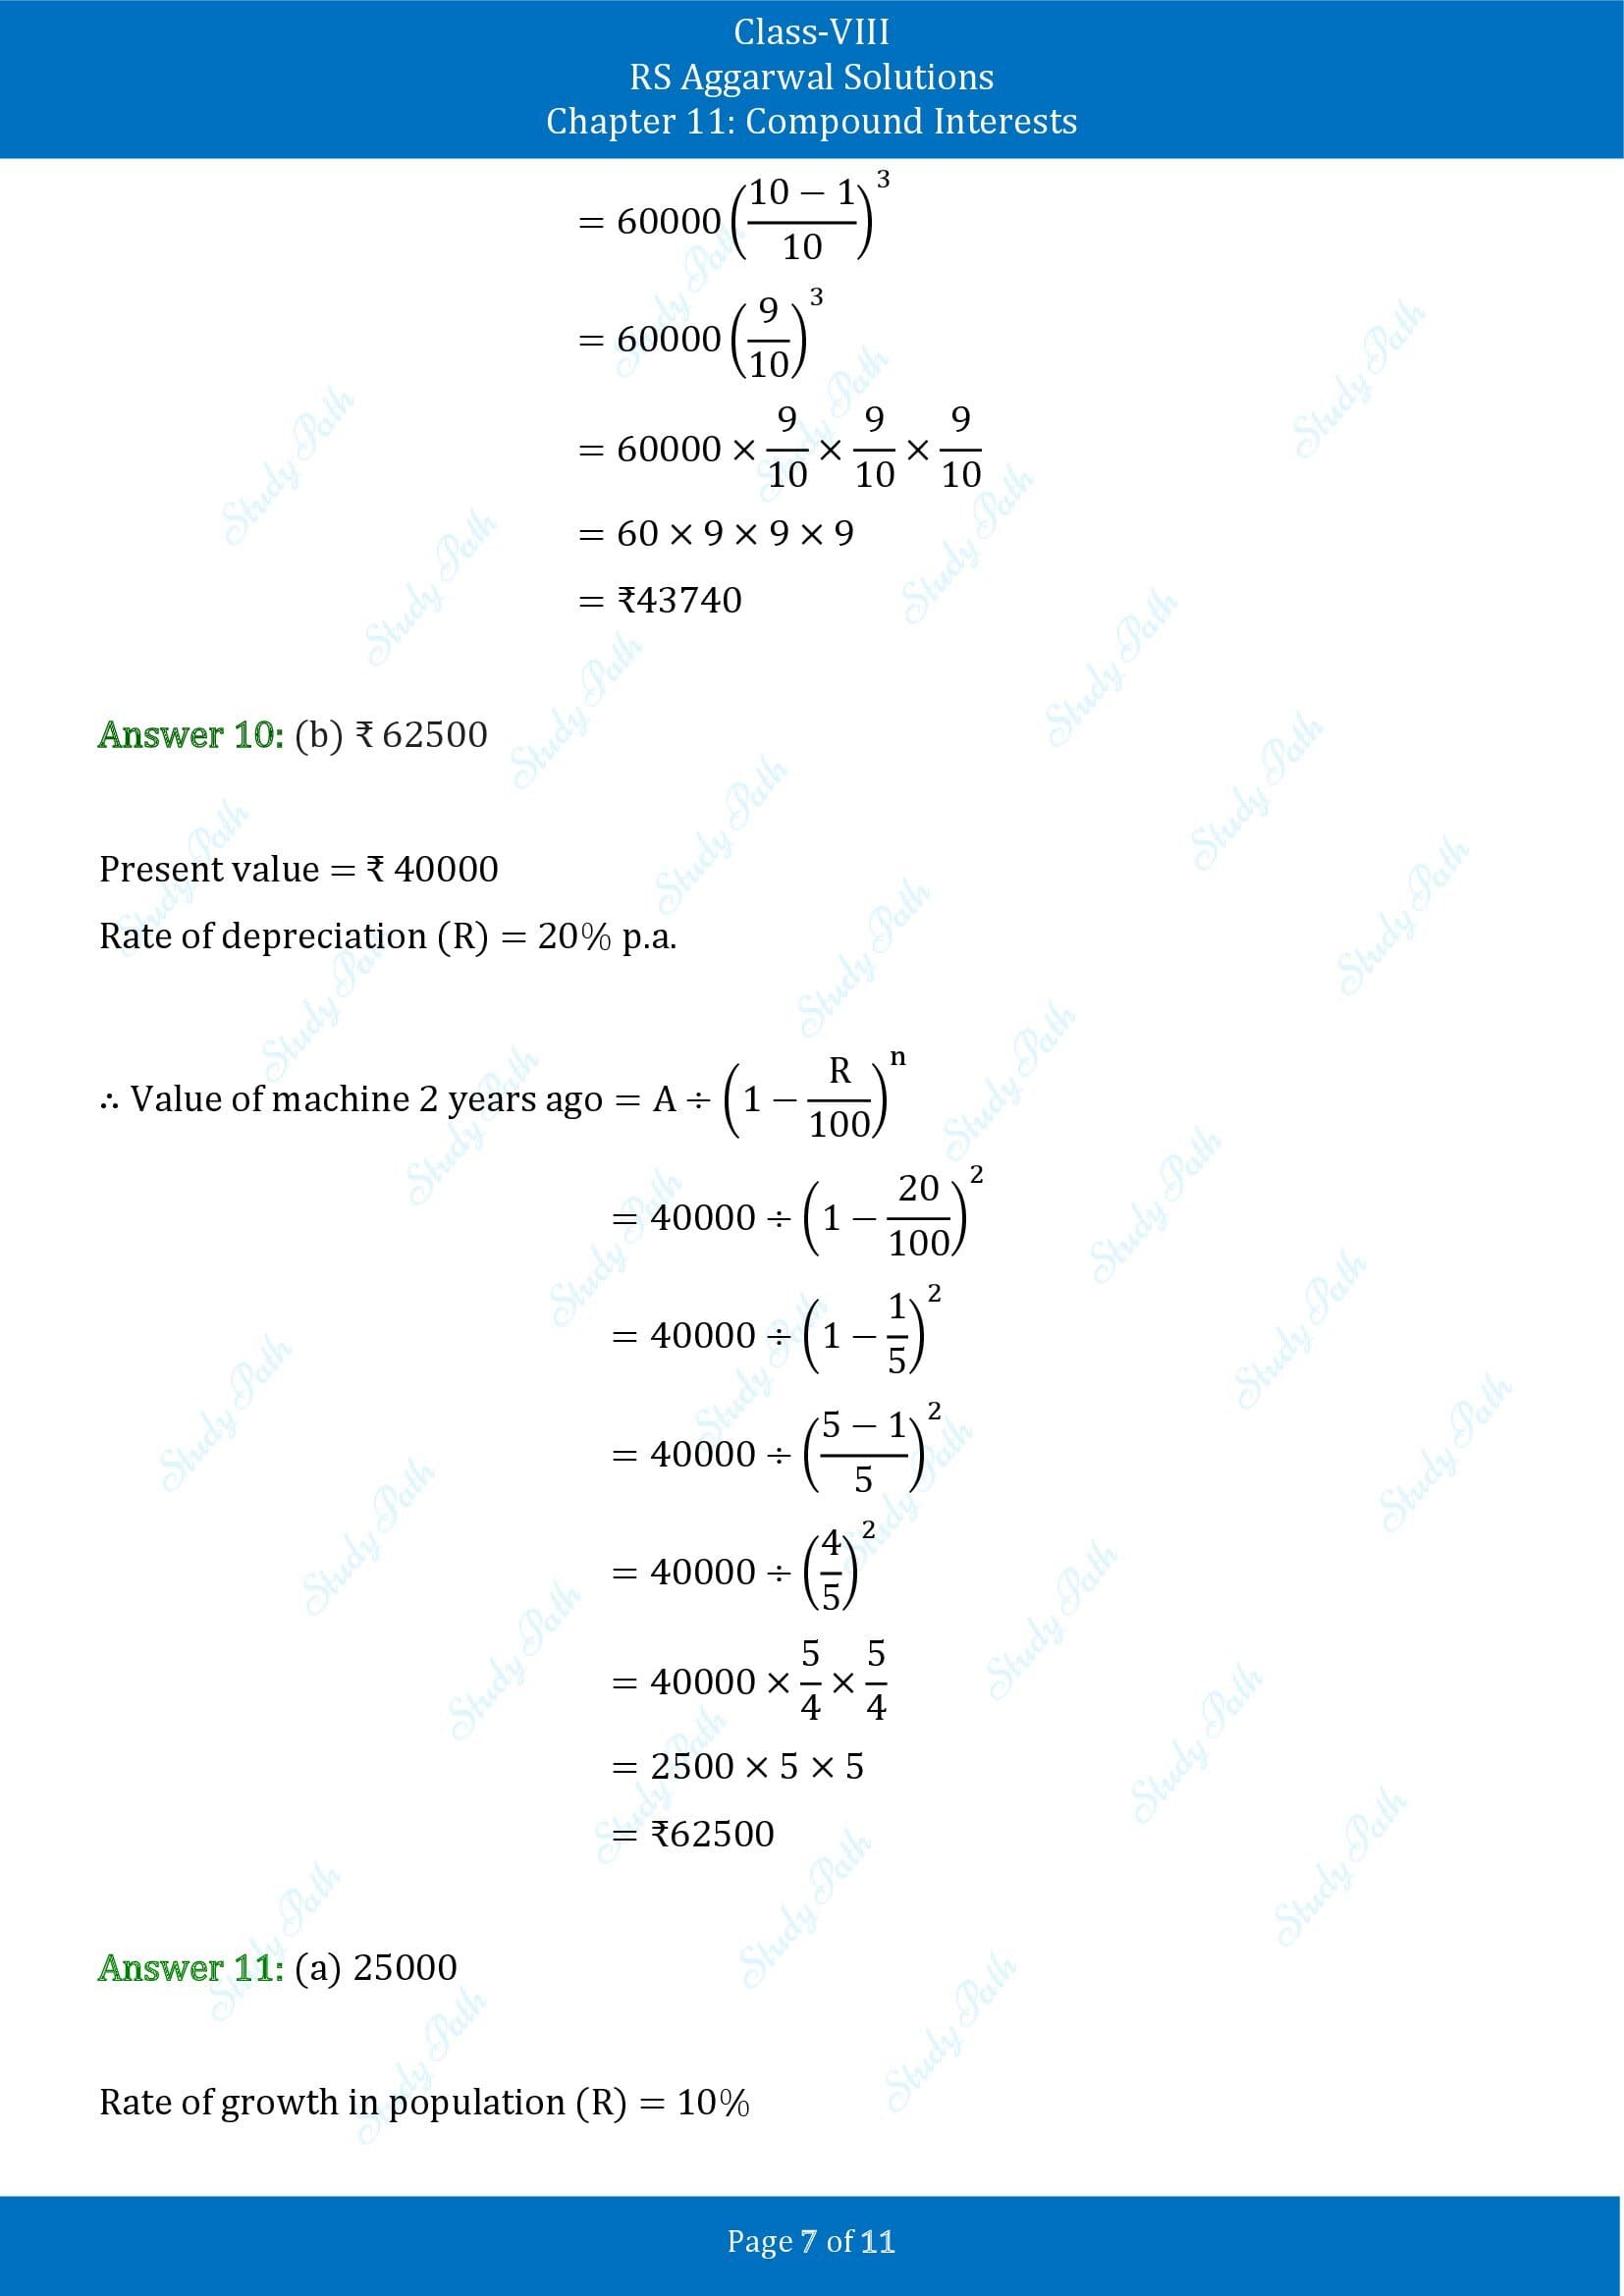 RS Aggarwal Solutions Class 8 Chapter 11 Compound Interests Exercise 11D MCQs 00007